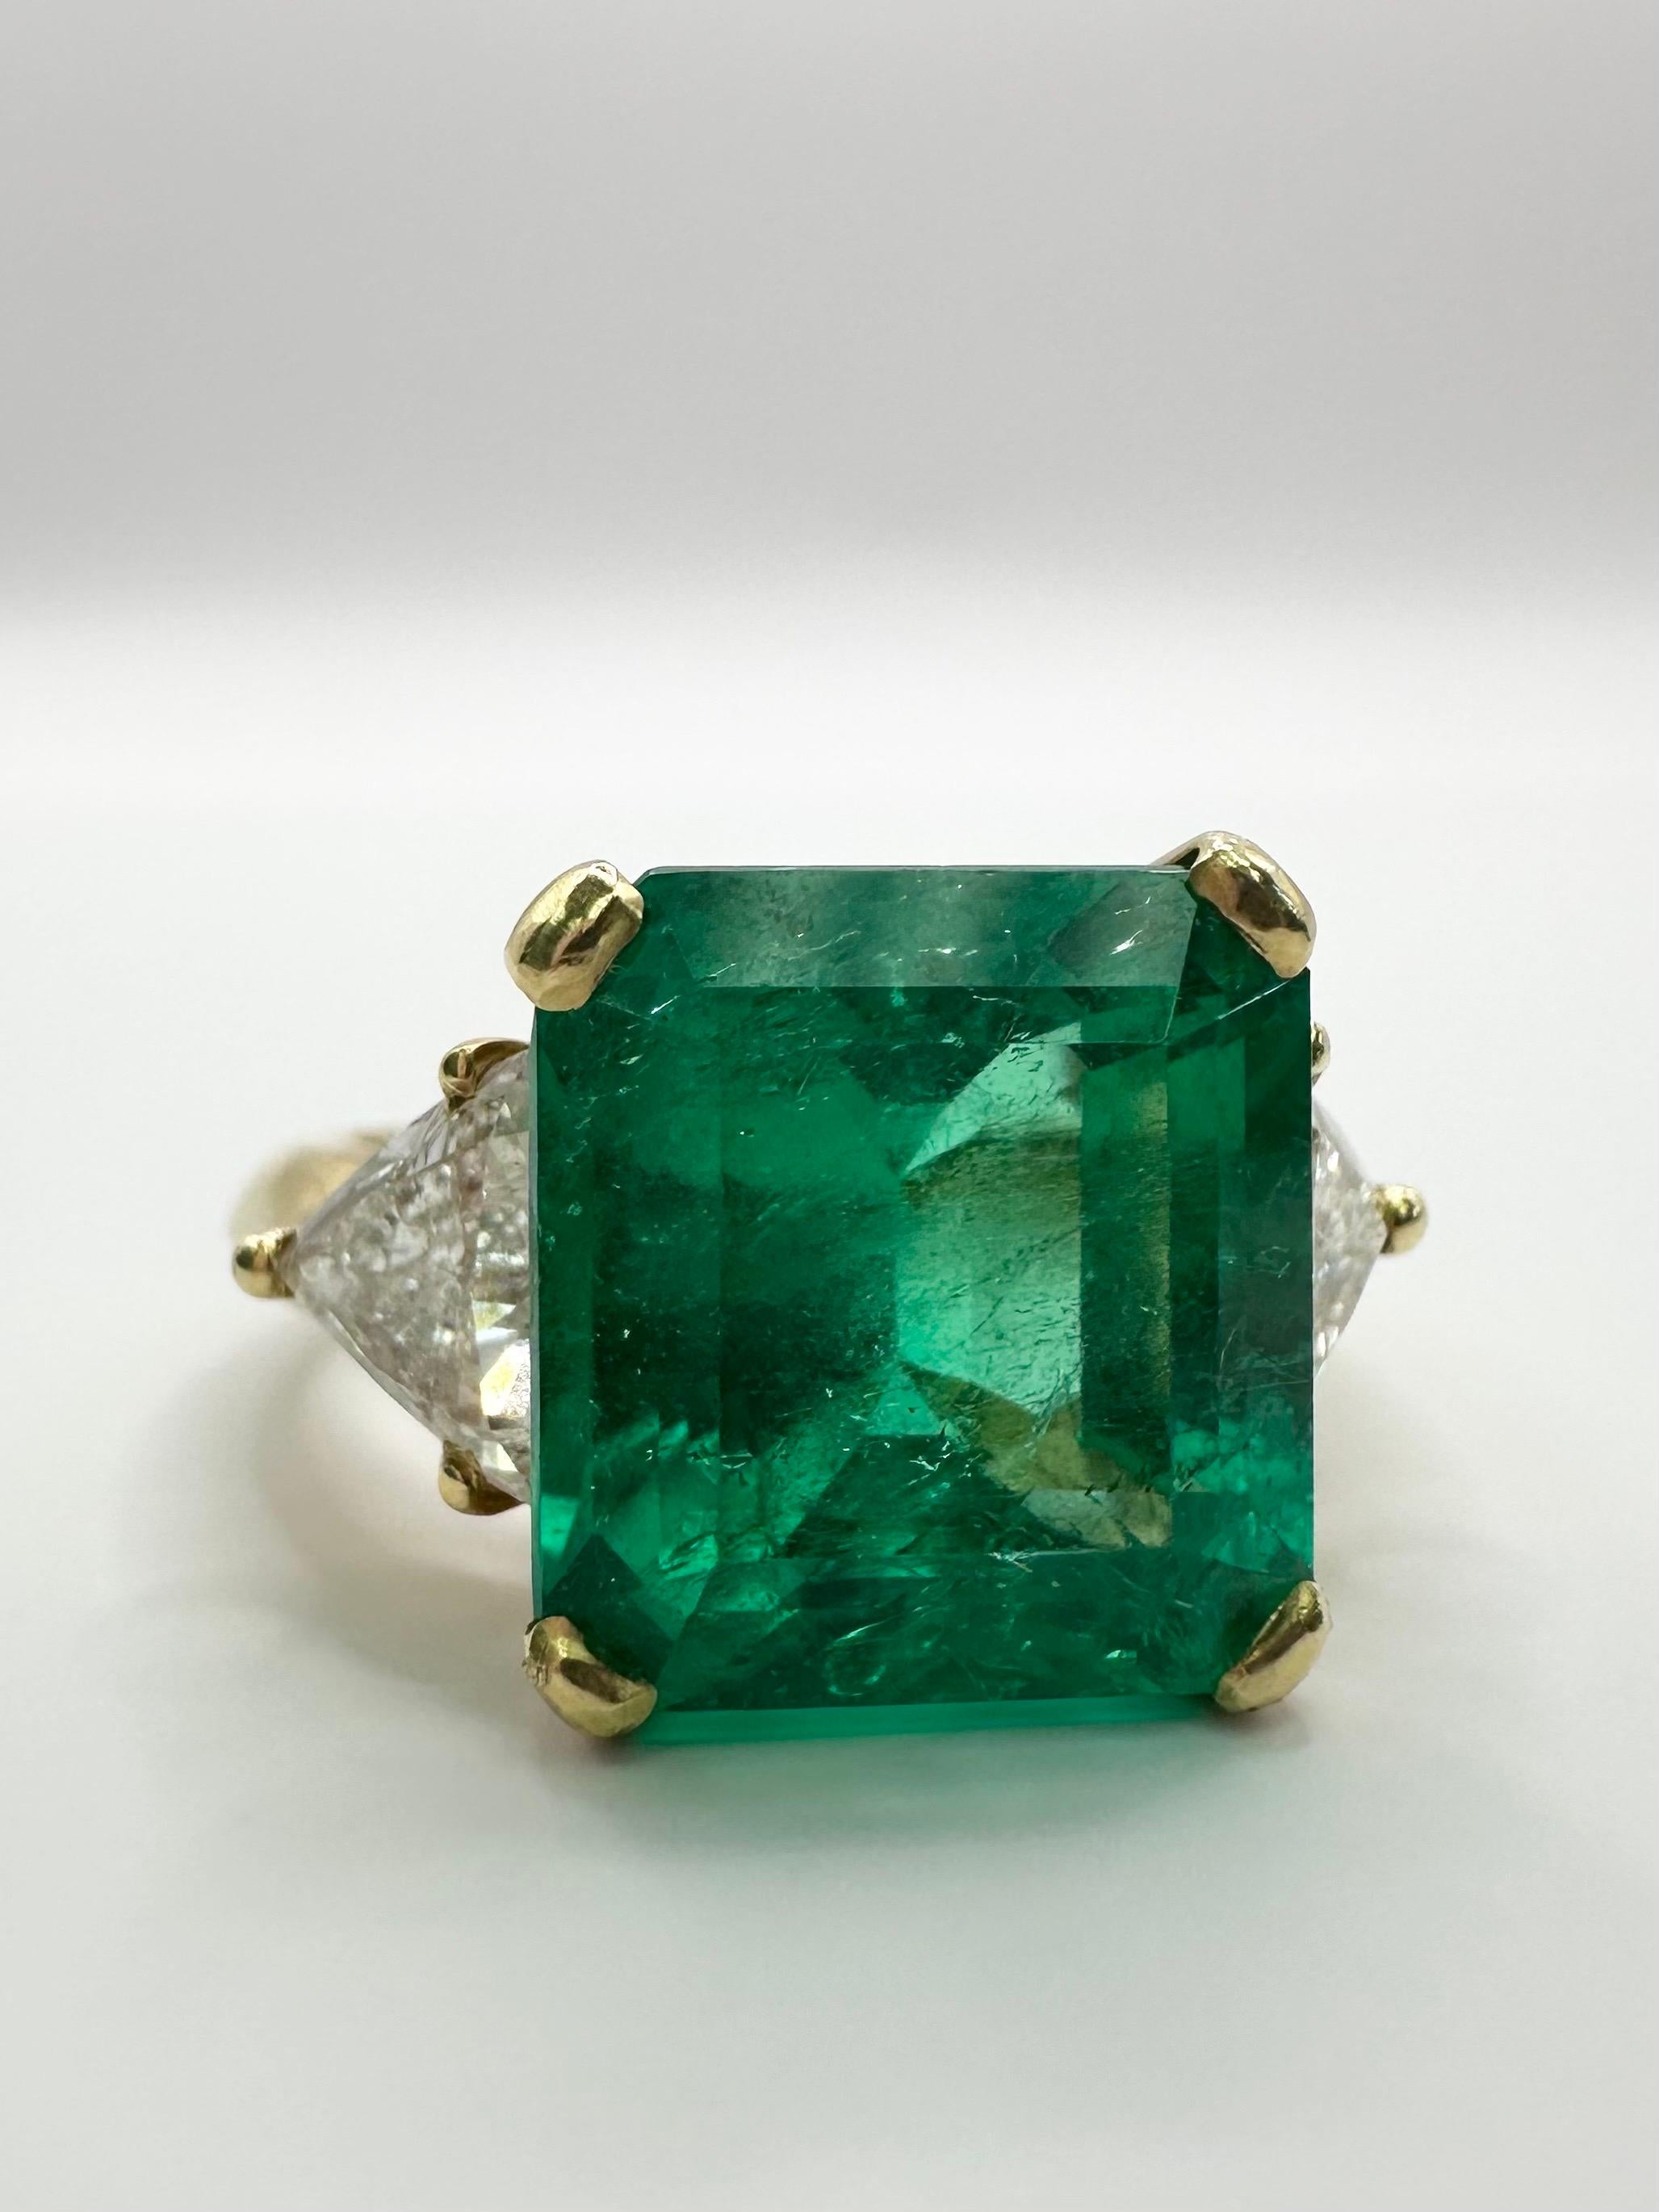 Fine Emerald Diamond ring in 18KT yellow gold, made with a large 6.98 carats emerald and flanked by a trillion brilliant on either side! Certificate of authenticity comes with the purchase for the gemstone and the ring.

Metal Type: 18KT

Natural